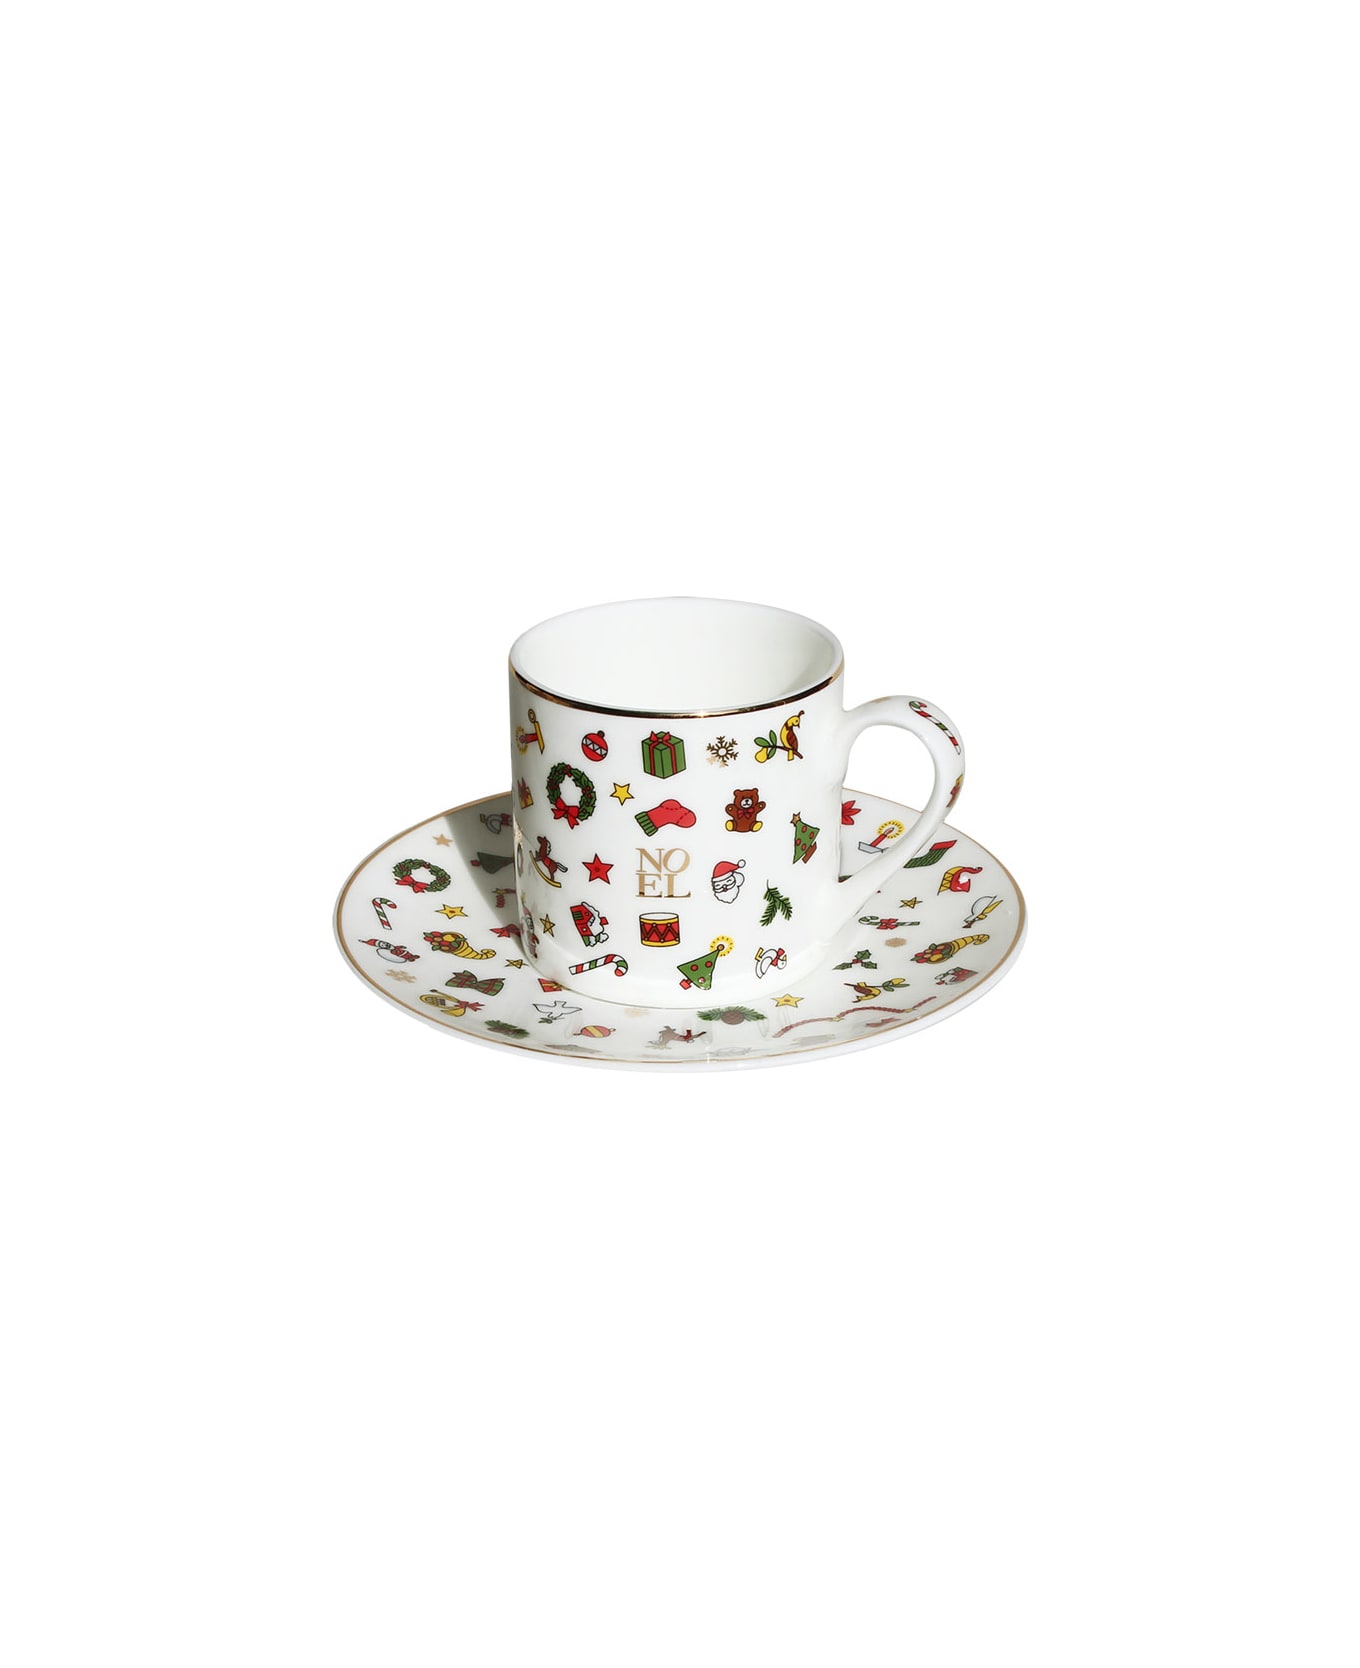 Taitù Set of 2 Espresso Cups & Saucers - Noel Oro Collection - Multicolor and Gold